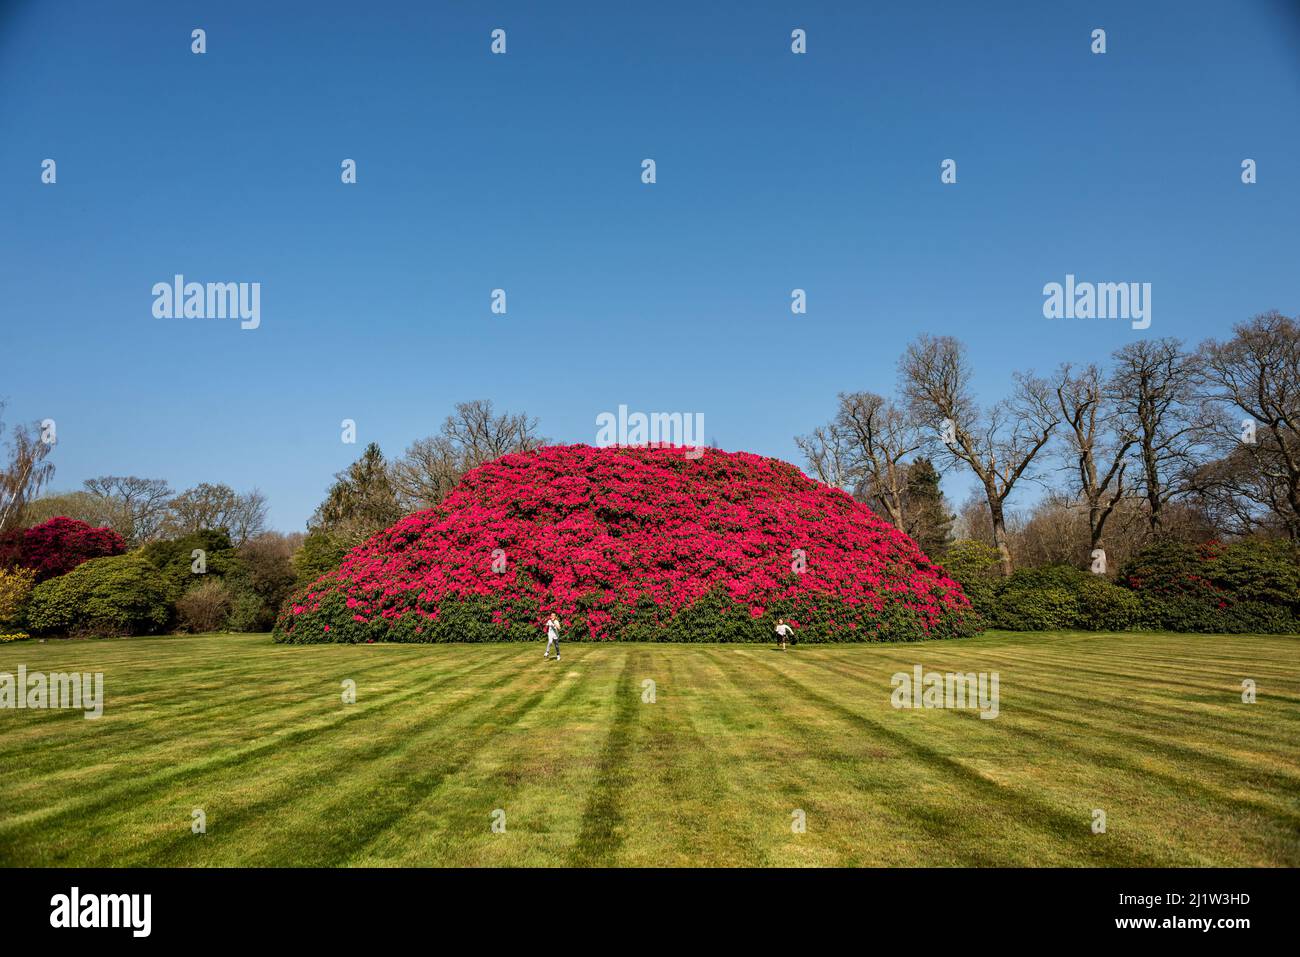 Horsham, March 26th 2022: The UK's largest rhododendron bush burst into flower this week, attracting visitors to the grounds of South Lodge Country Ho Stock Photo